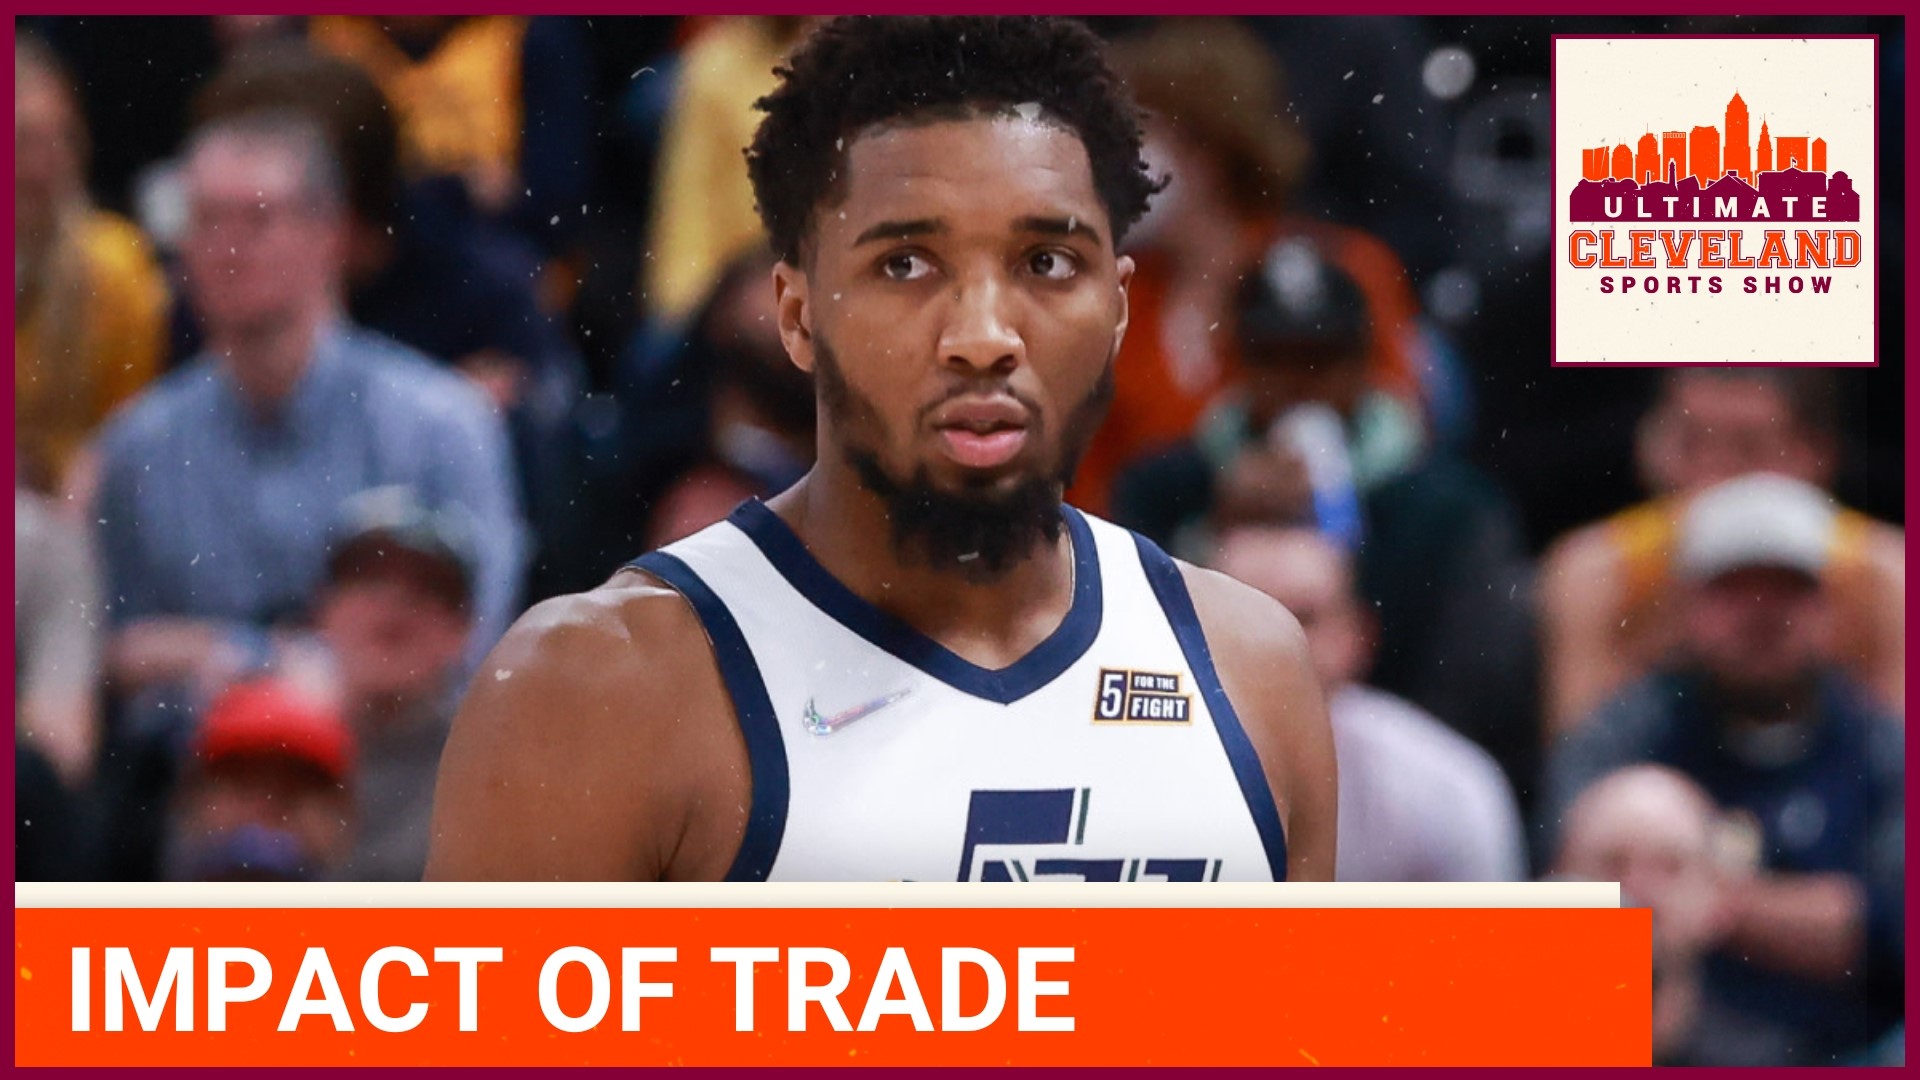 What impact will the trade for Donovan Mitchell have on the Cleveland Cavaliers when Evan Mobley is eligible for a contract extension?